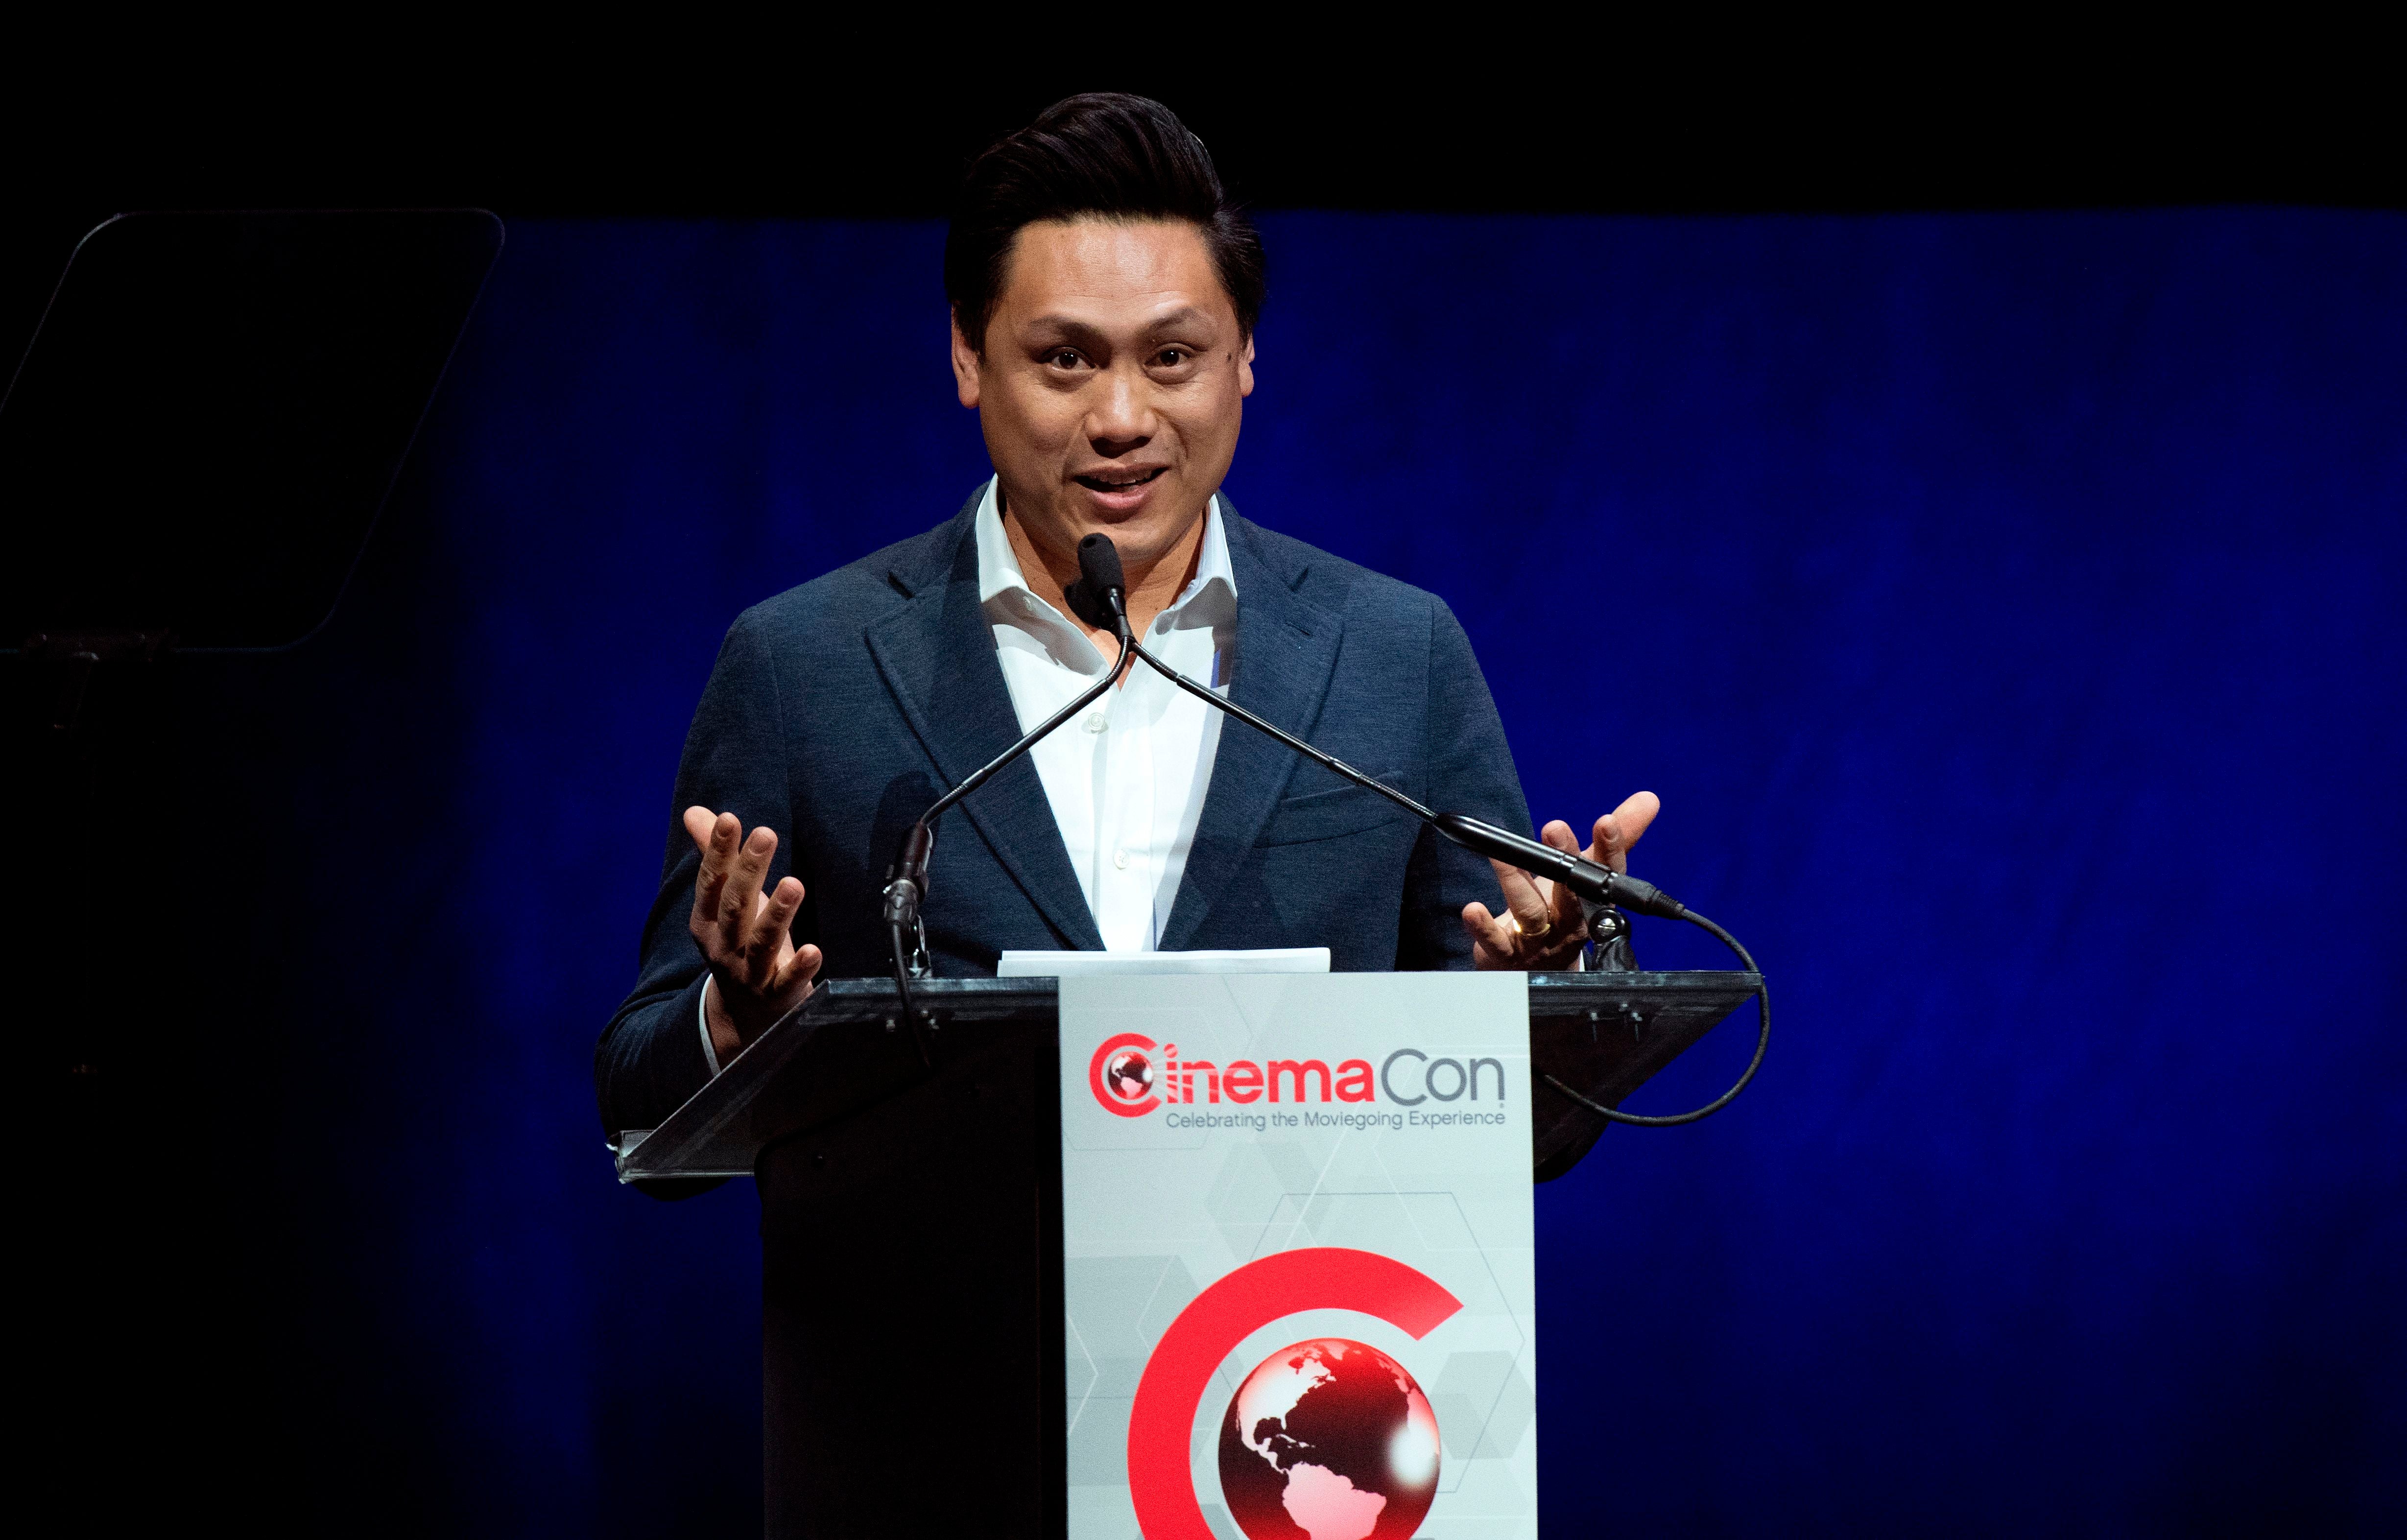 Jon M Chu, director of movies including 2018 hit Crazy Rich Asians, had been due to give a commencement speech